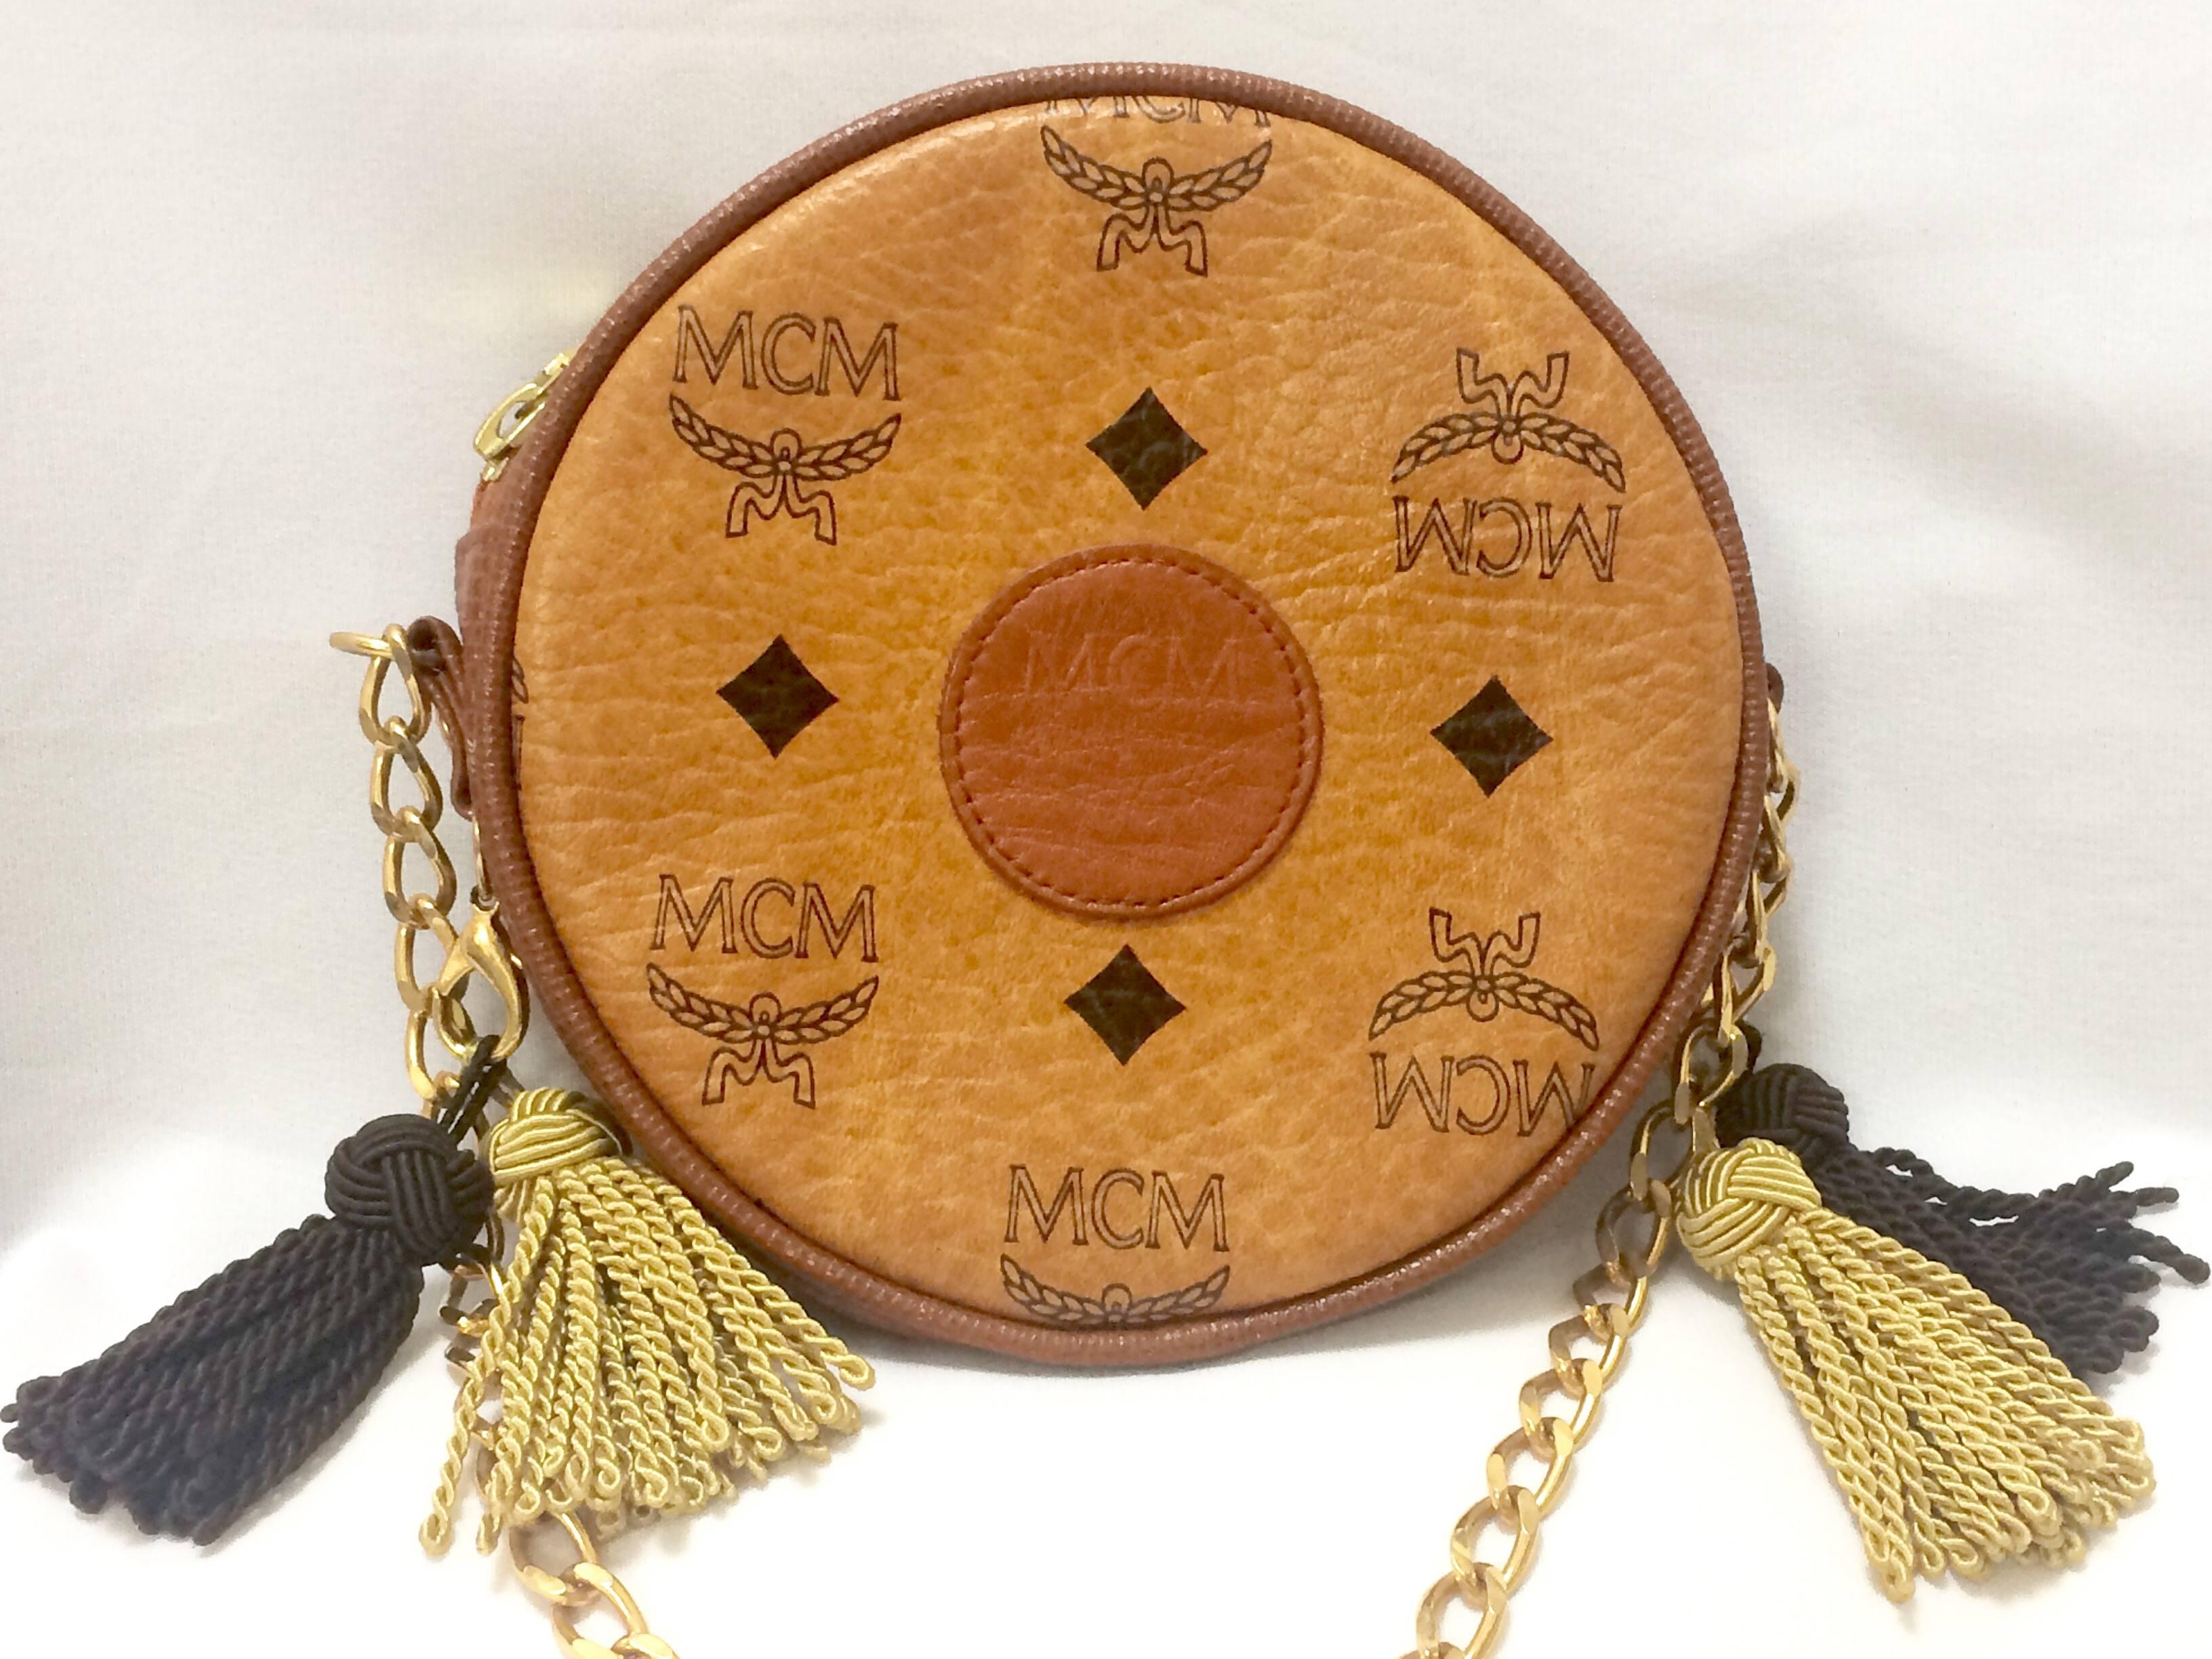 1980s. MINT. Vintage MCM brown monogram round shape mini chain shoulder purse with brown and beige fringes. Designed by Michael Cromer. Made in West Germany.

MCM has been back in the fashion trend again!!
Now it's considered to be one of the